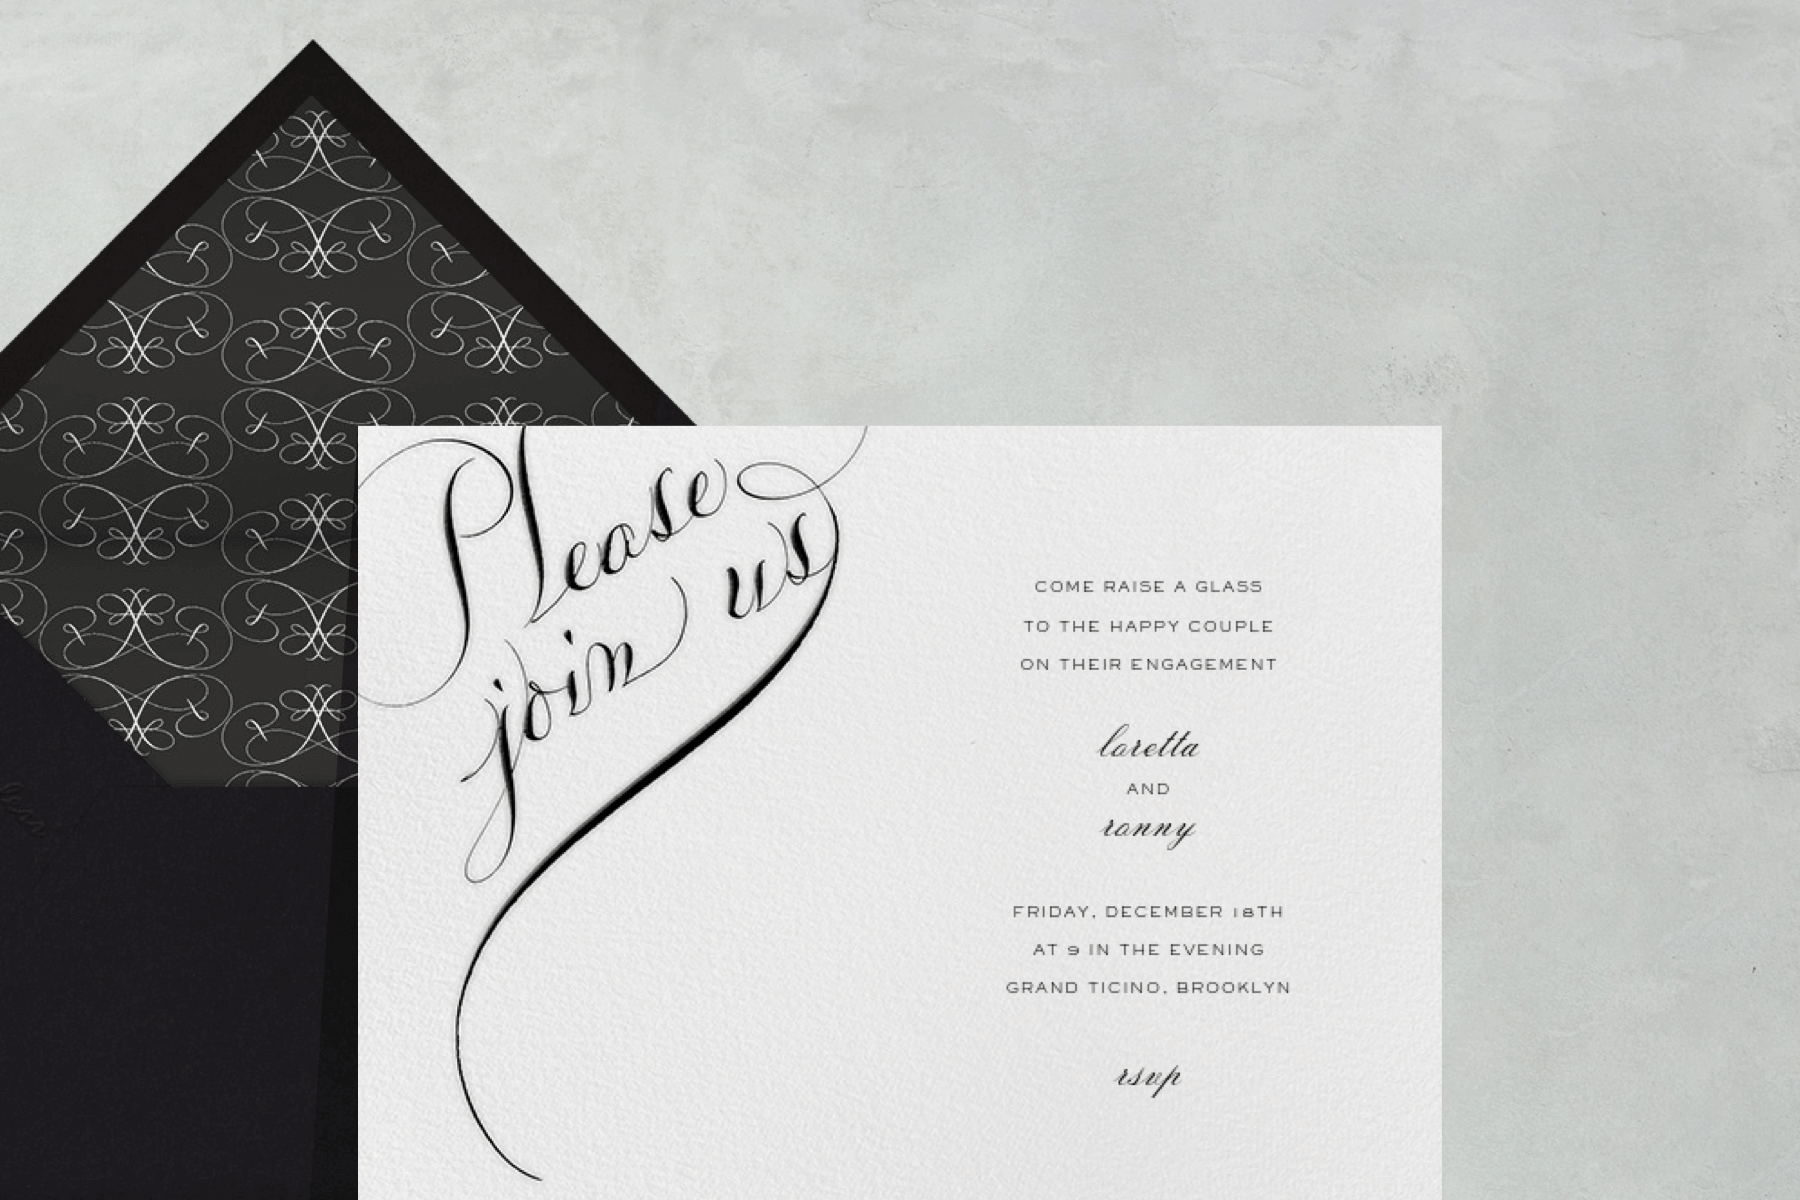 A white and black wedding invitation with calligraphy.